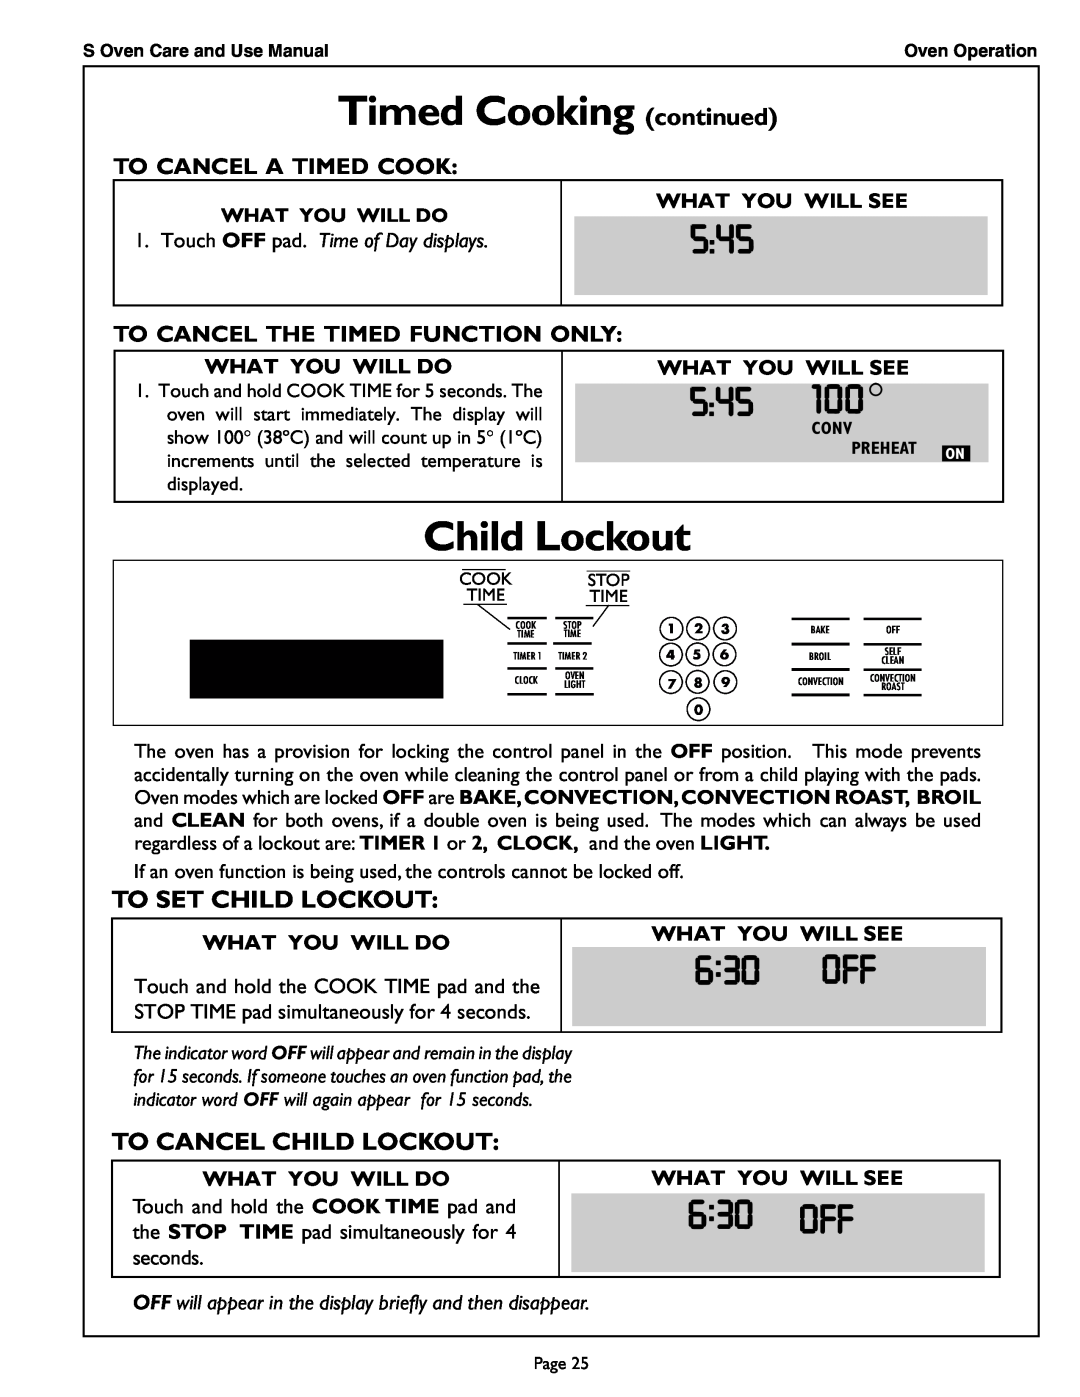 Thermador SCD302 630 OFF, To Set Child Lockout, To Cancel Child Lockout, To Cancel A Timed Cook, What You Will See 